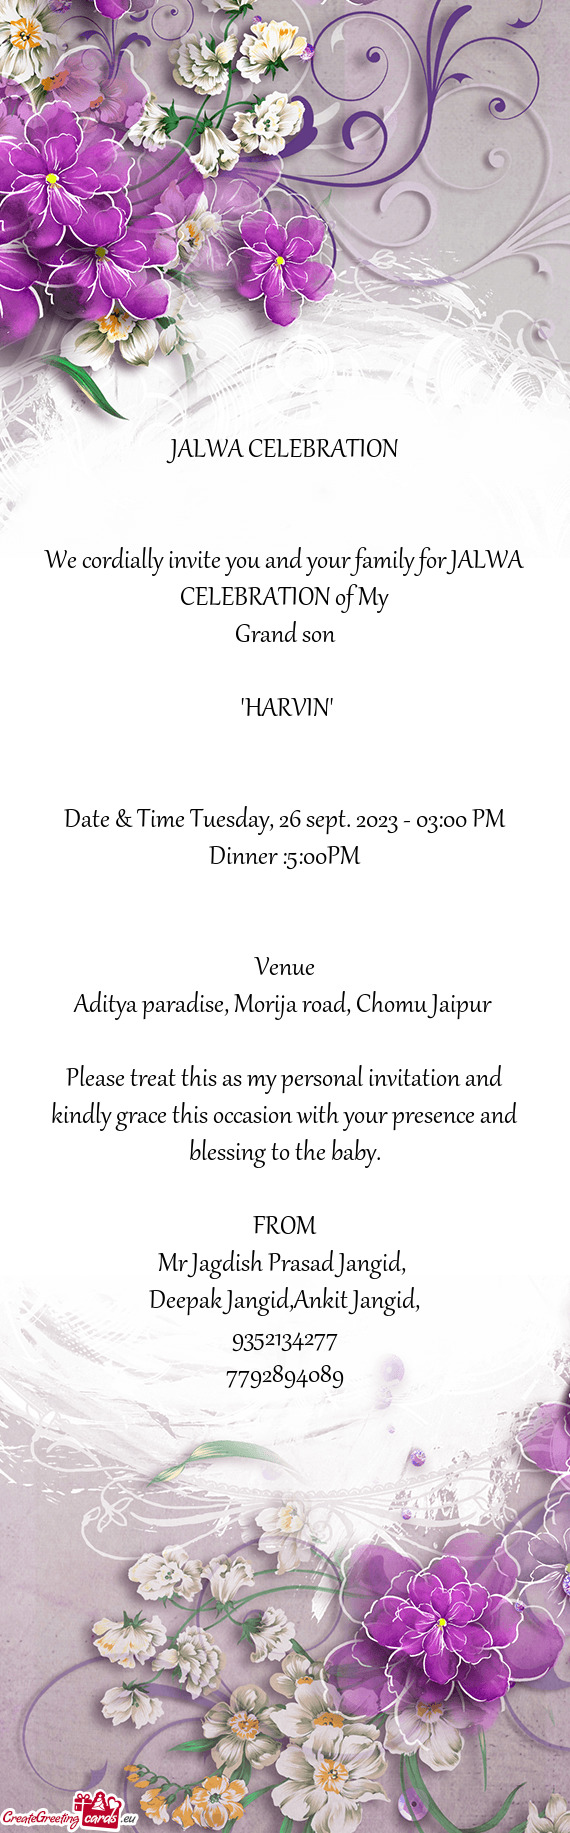 We cordially invite you and your family for JALWA CELEBRATION of My